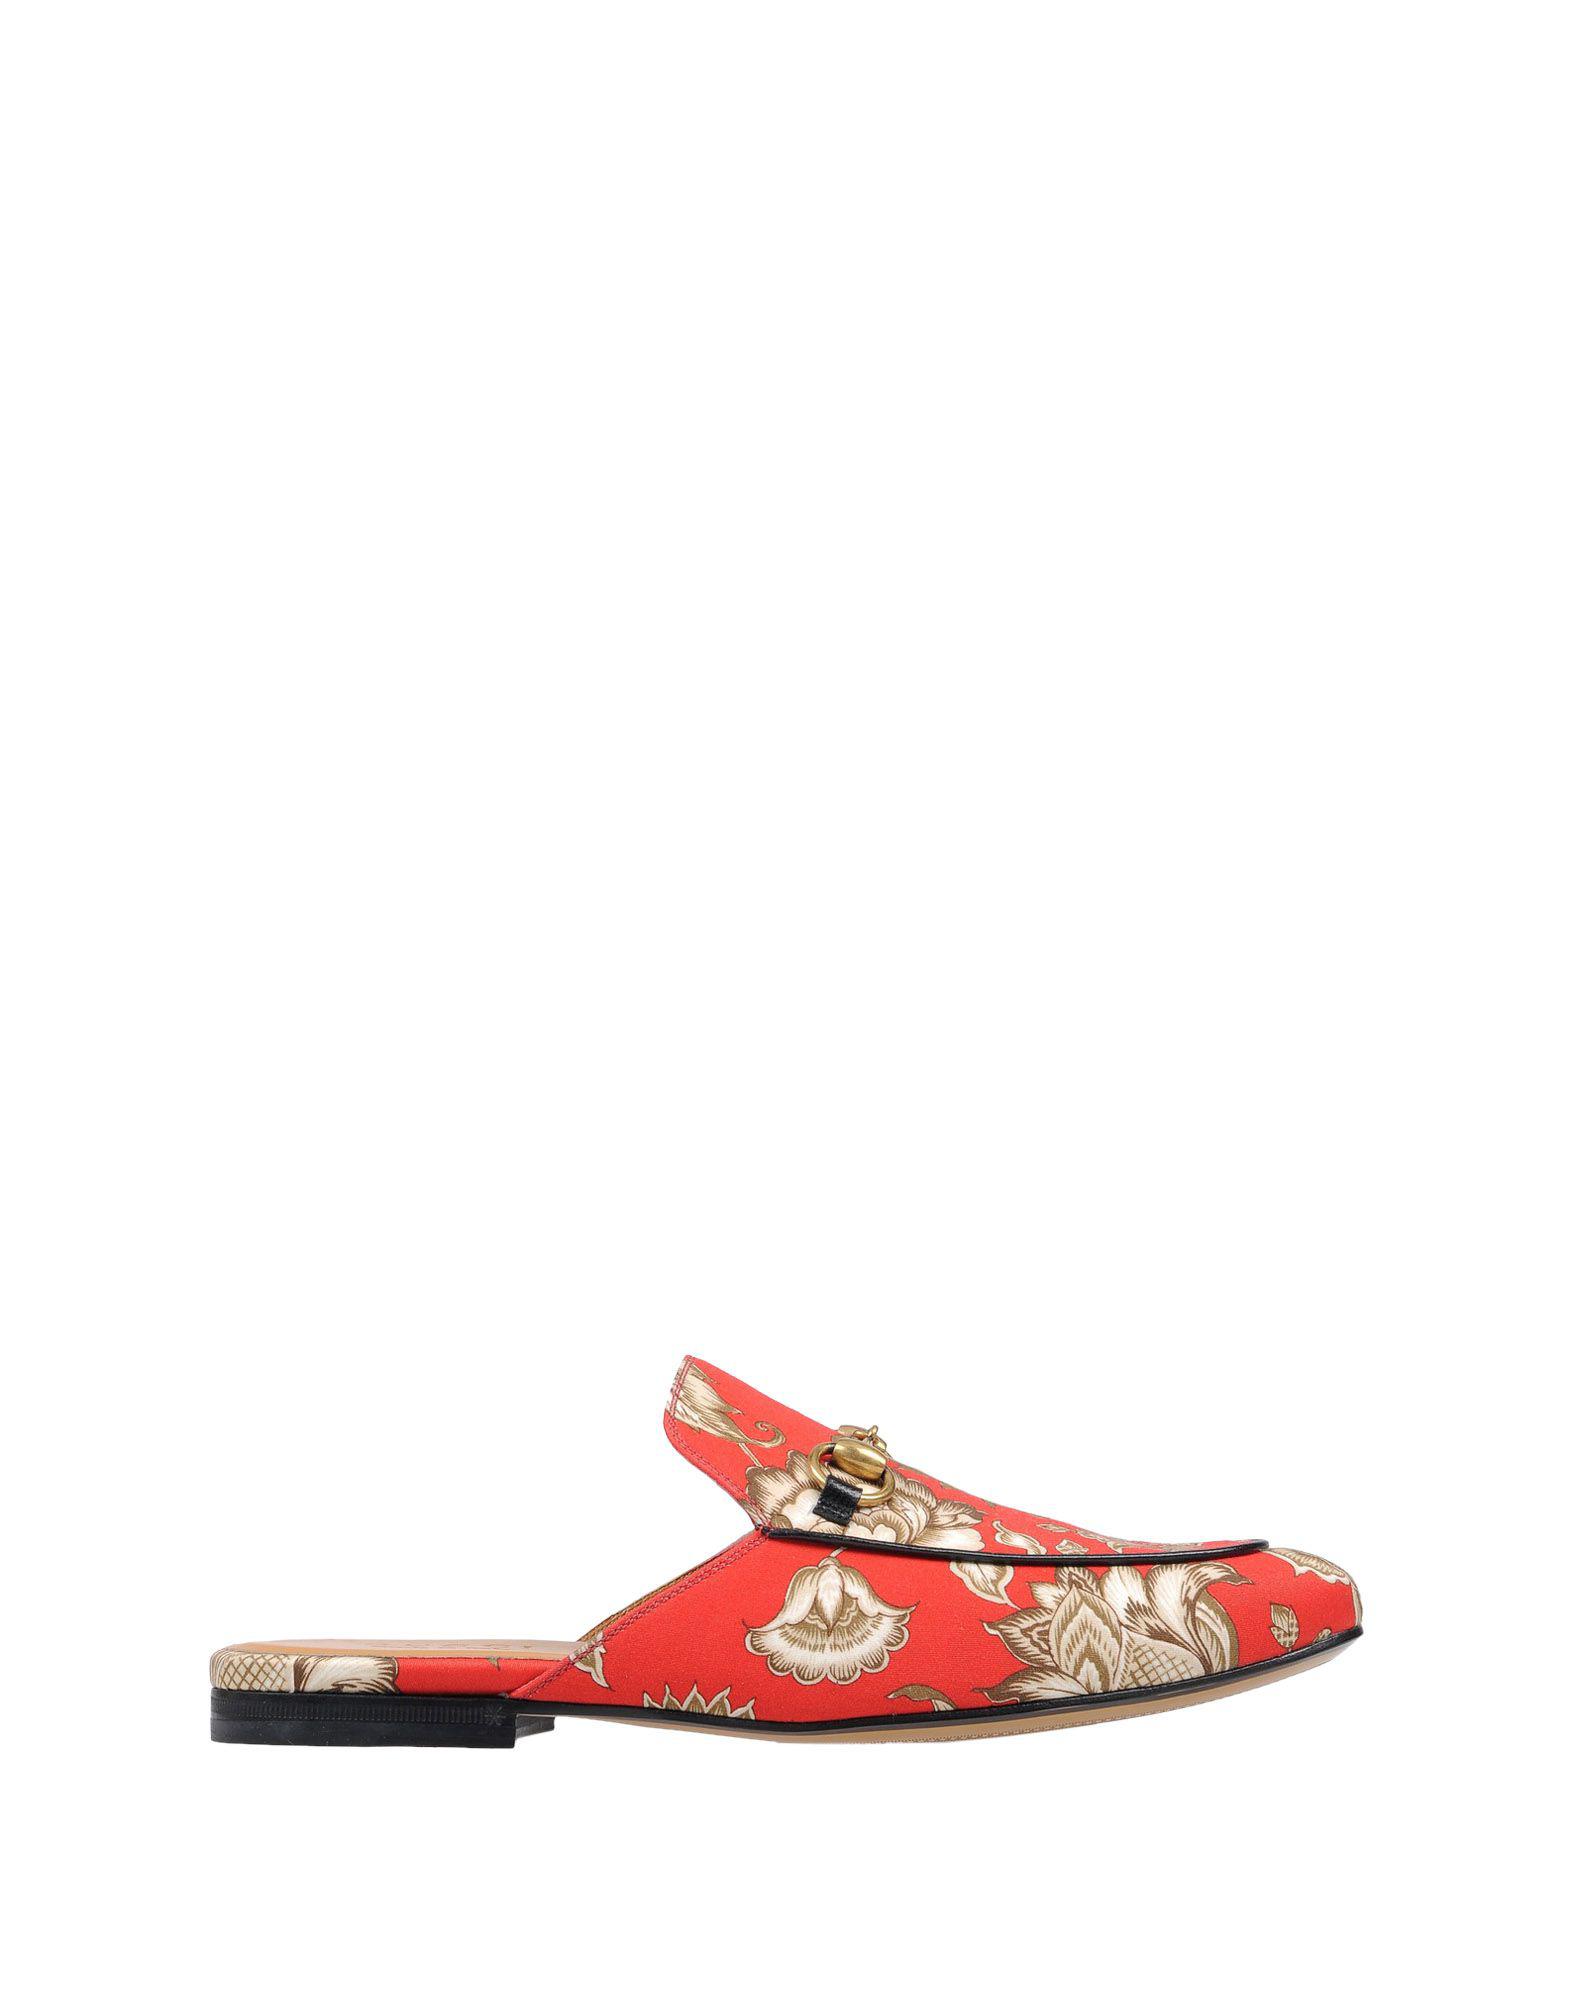 Gucci Satin Mules in Red for Men - Lyst